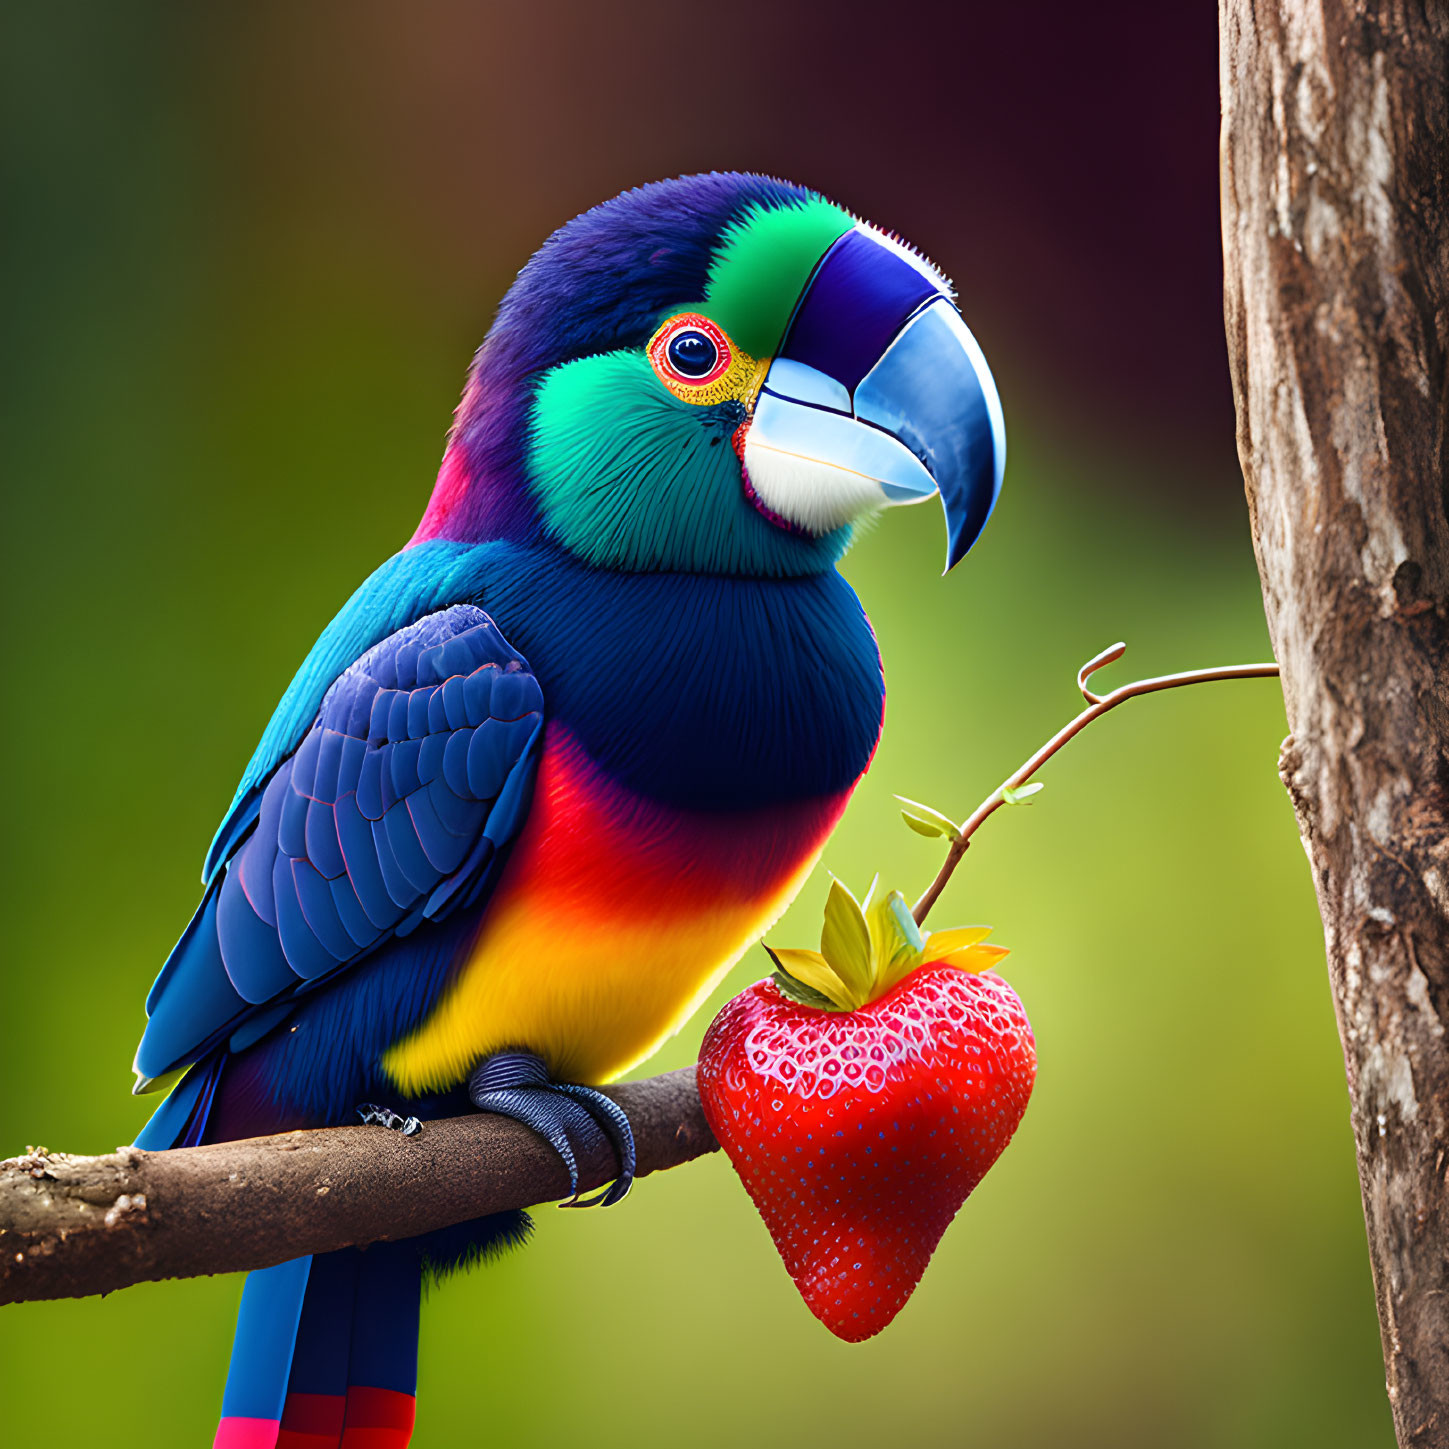 Colorful Parrot with Strawberry Perched on Branch